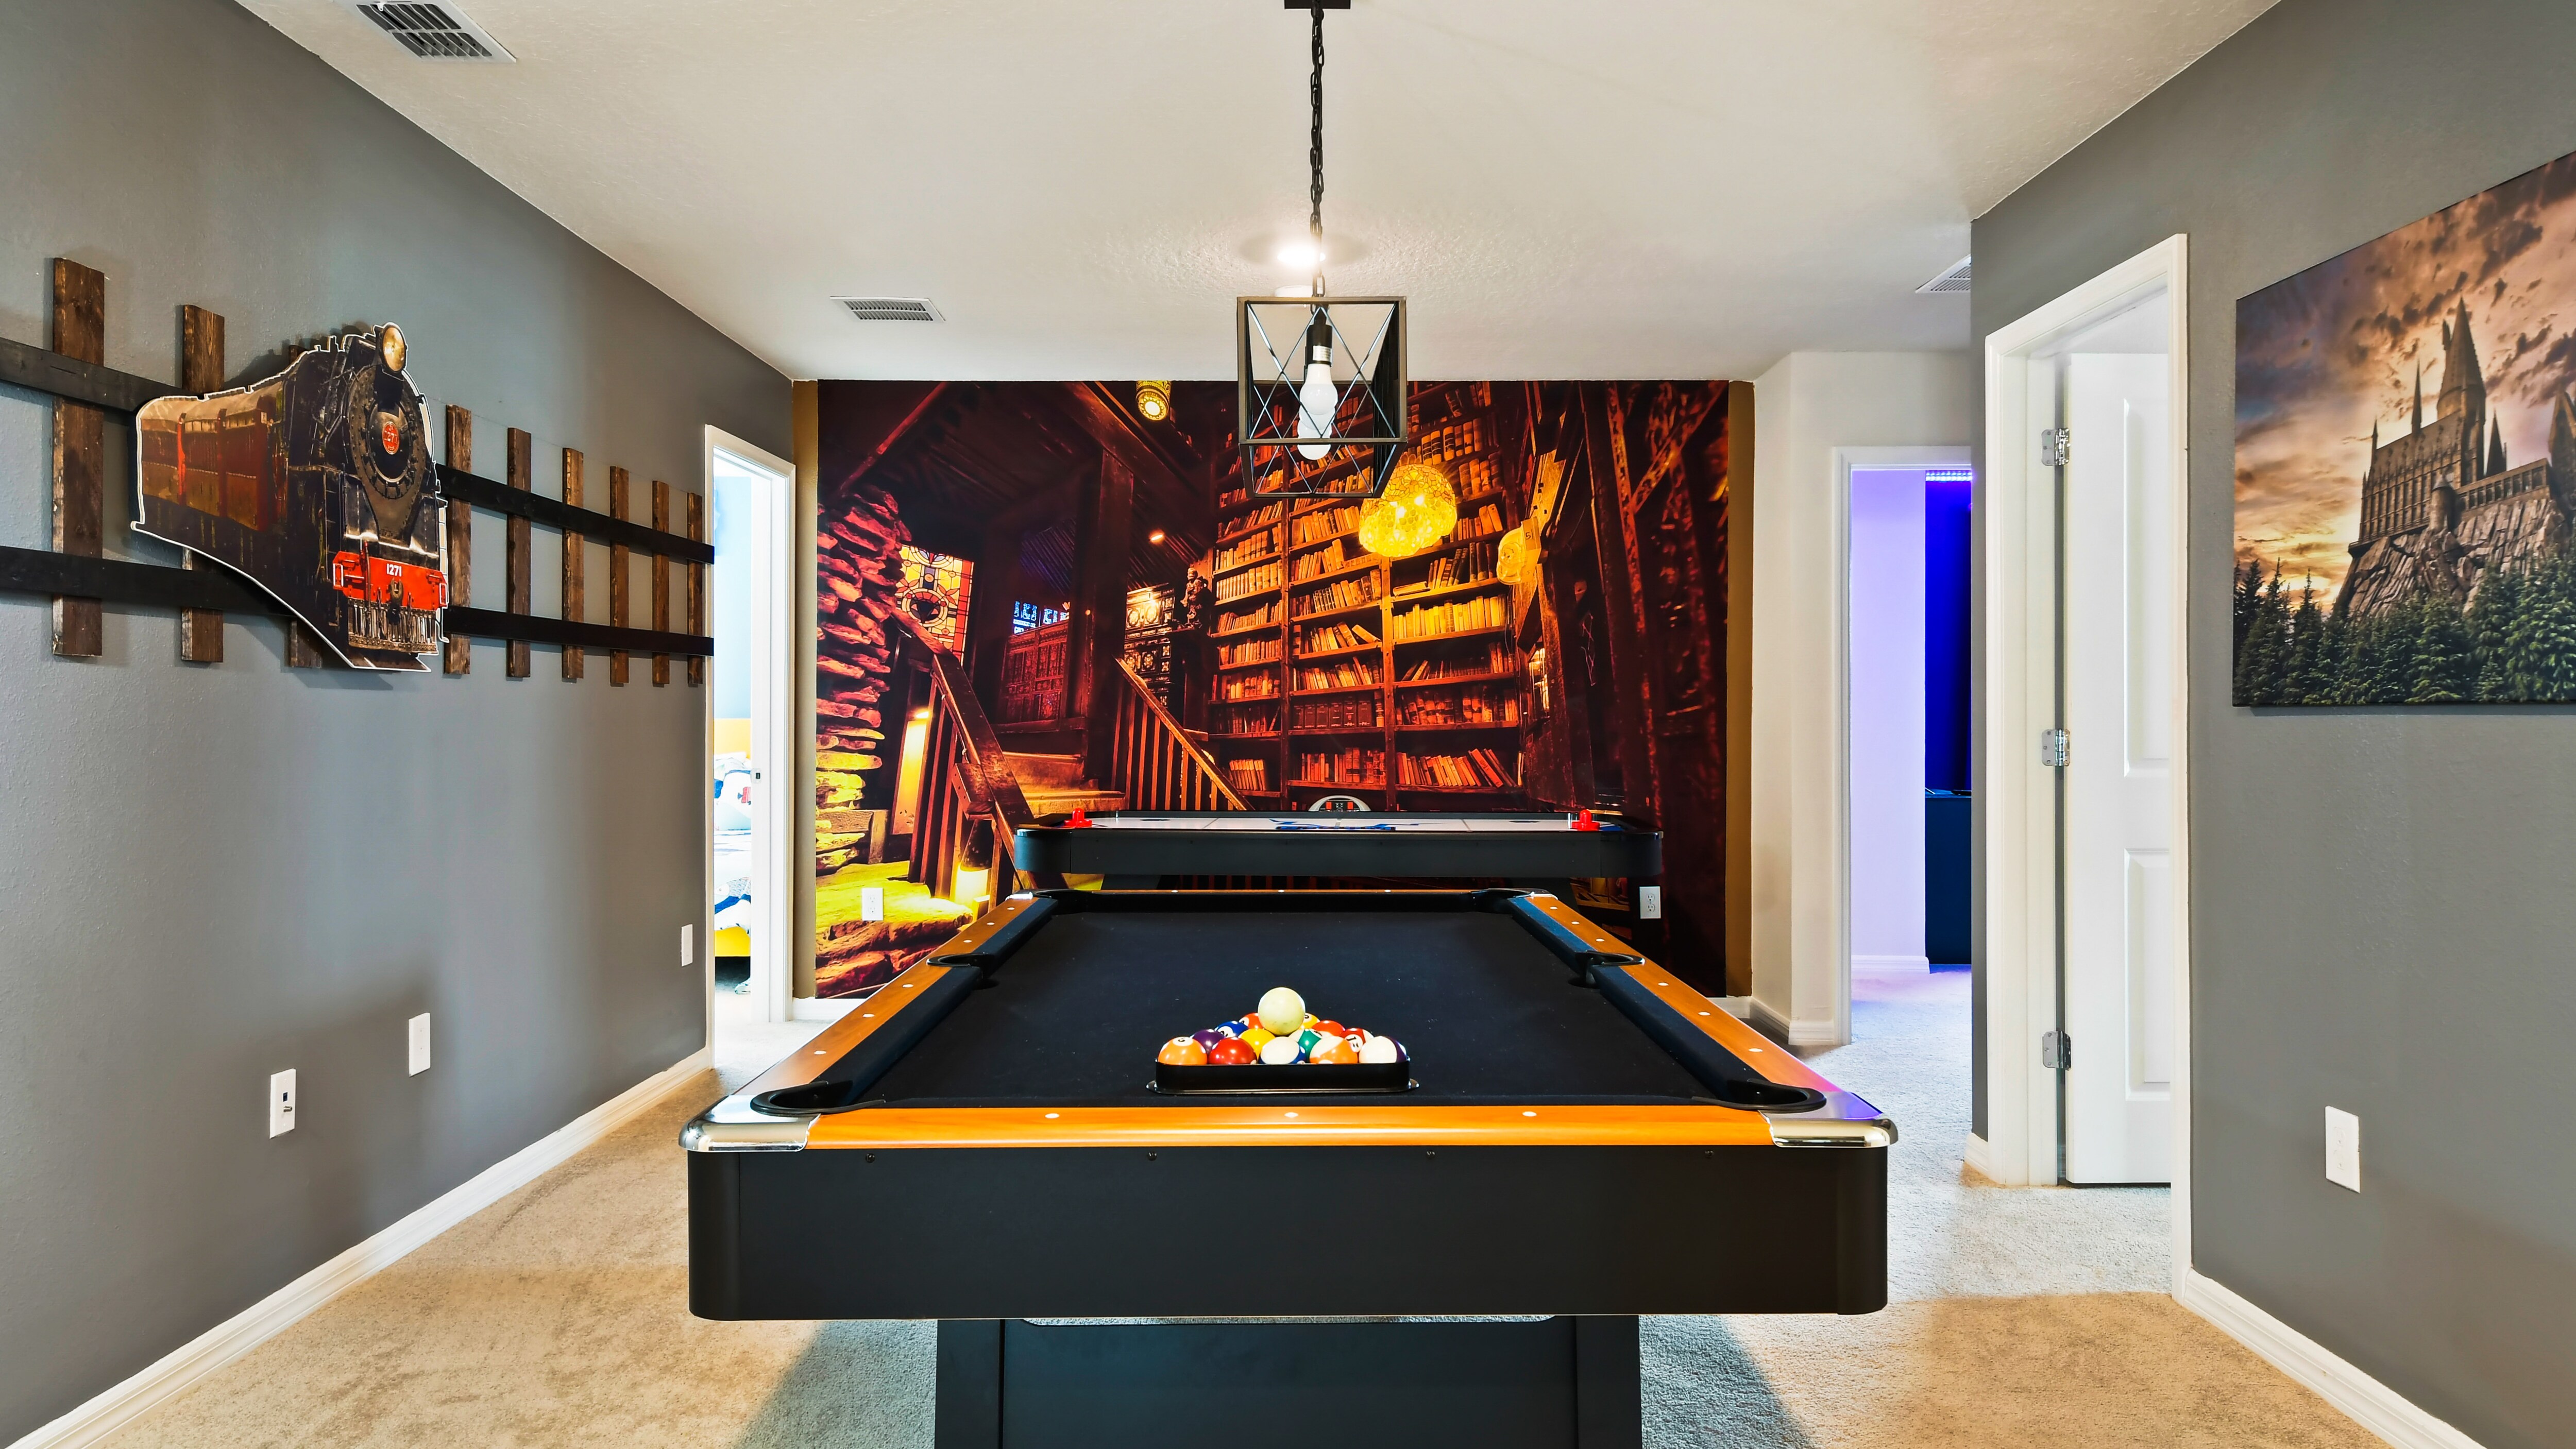 Have a hit of pool with friends in the upstairs game loft